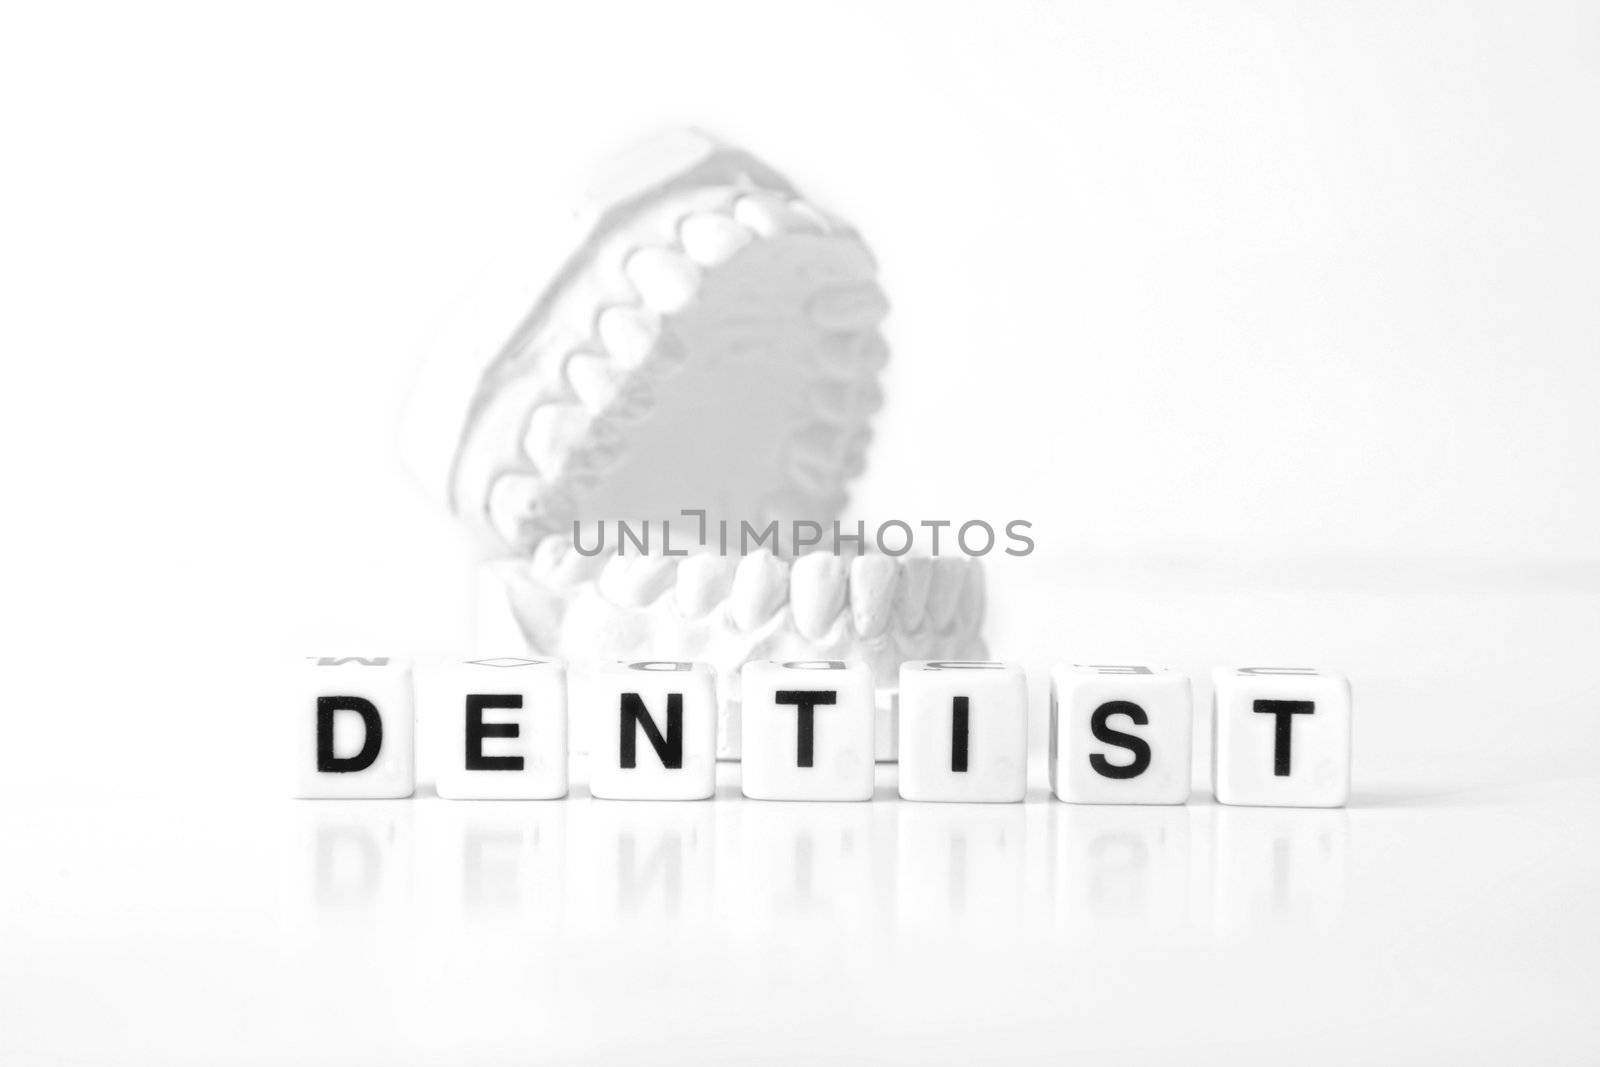 A plaster cast of teeth behind several dices that form the word dentist. All on white background.